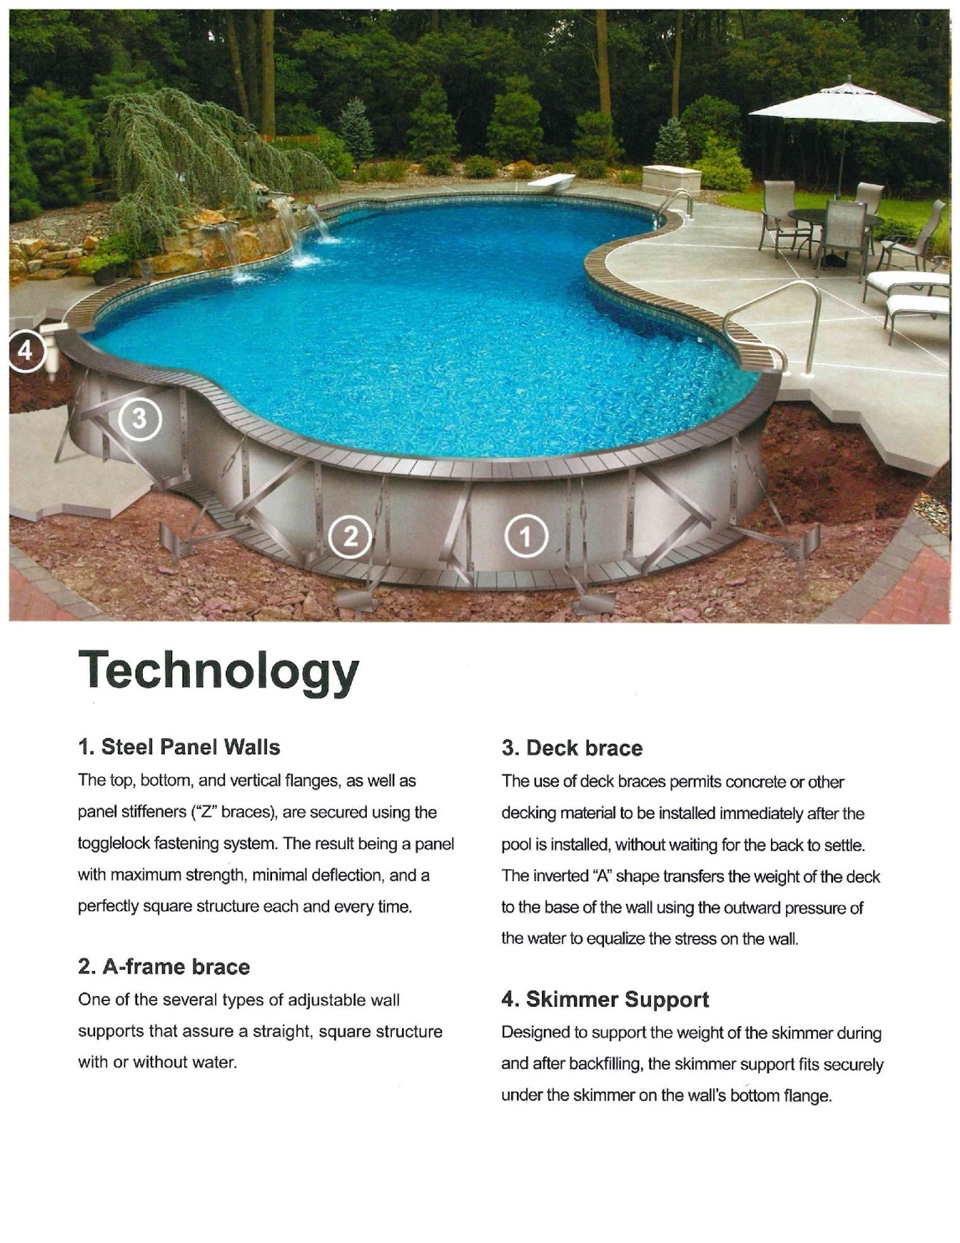 Inground pool technology with explanation